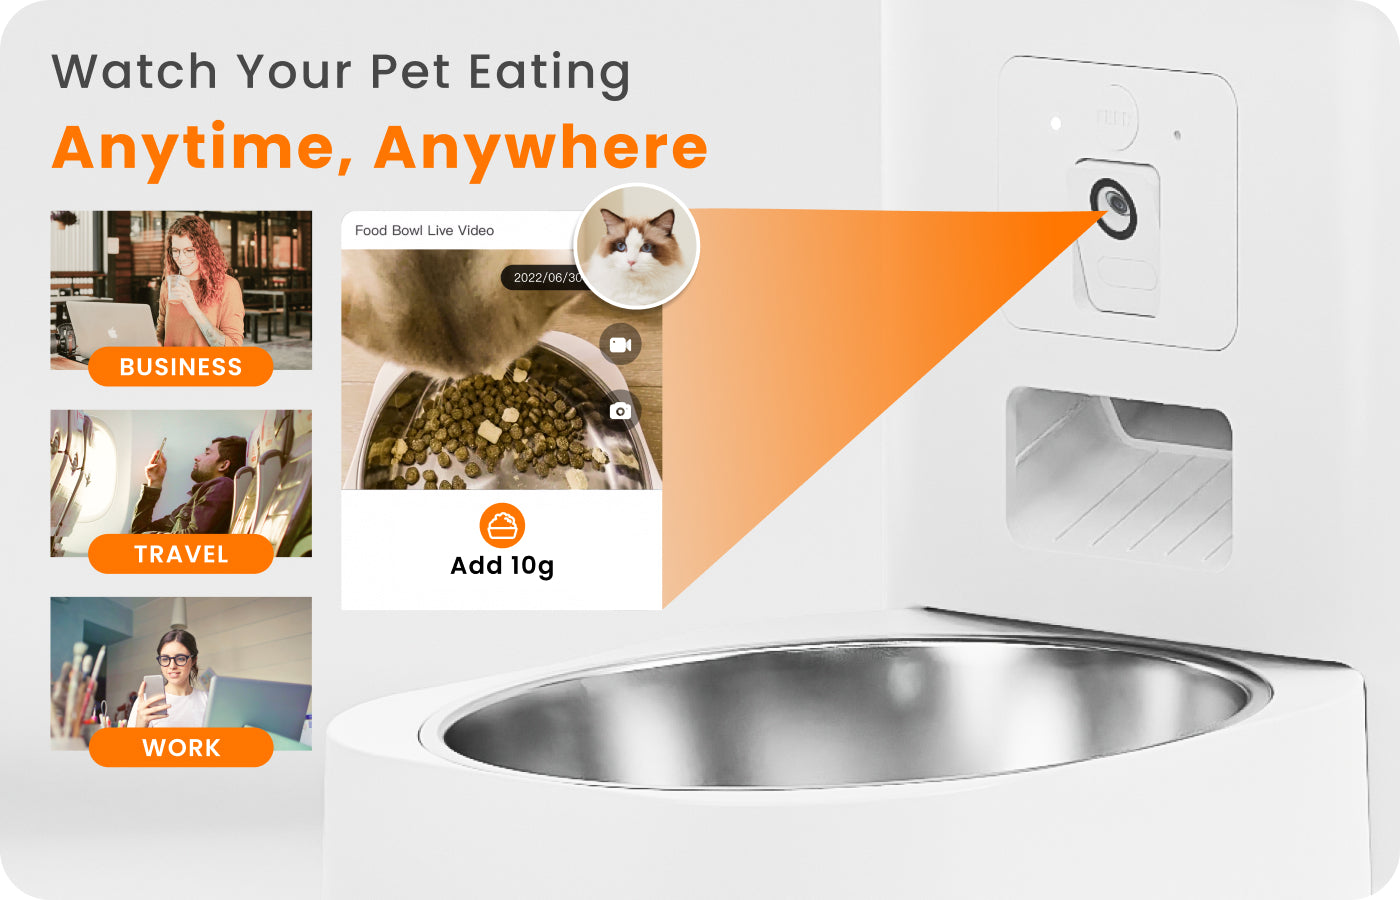 HHOLOVE Smart Feeder's function - Food Bowl Visibility